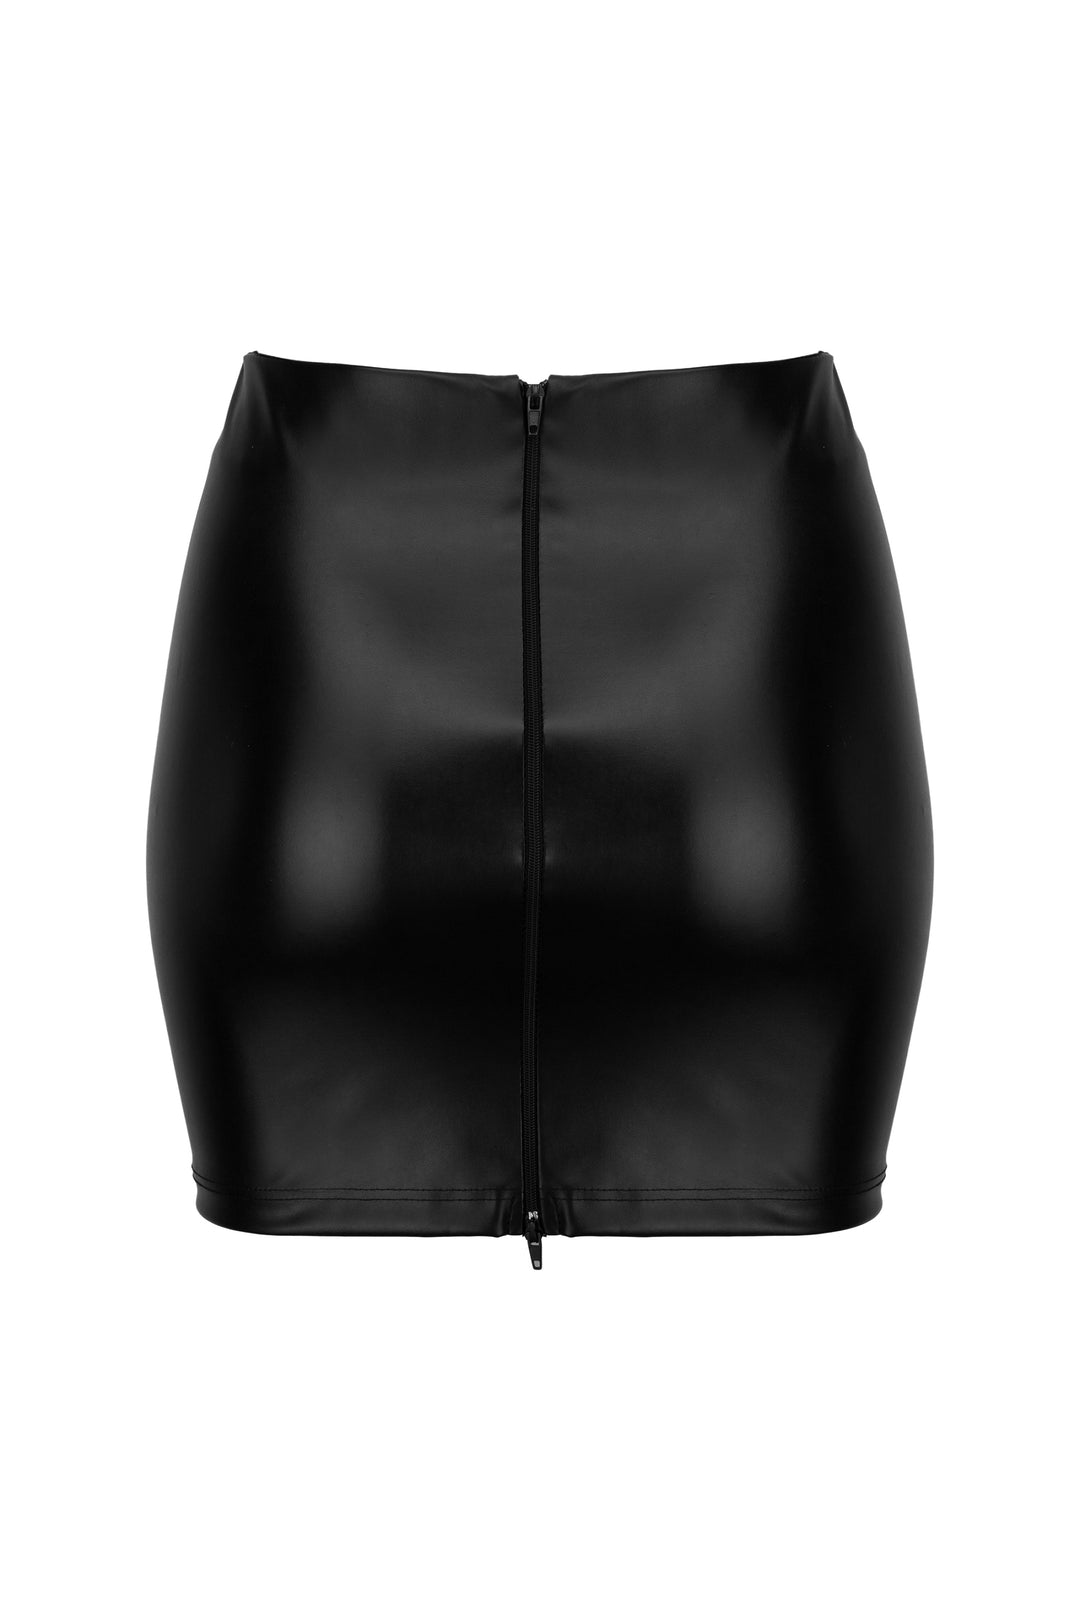 Wet Look Eco-Leather skirt with tape